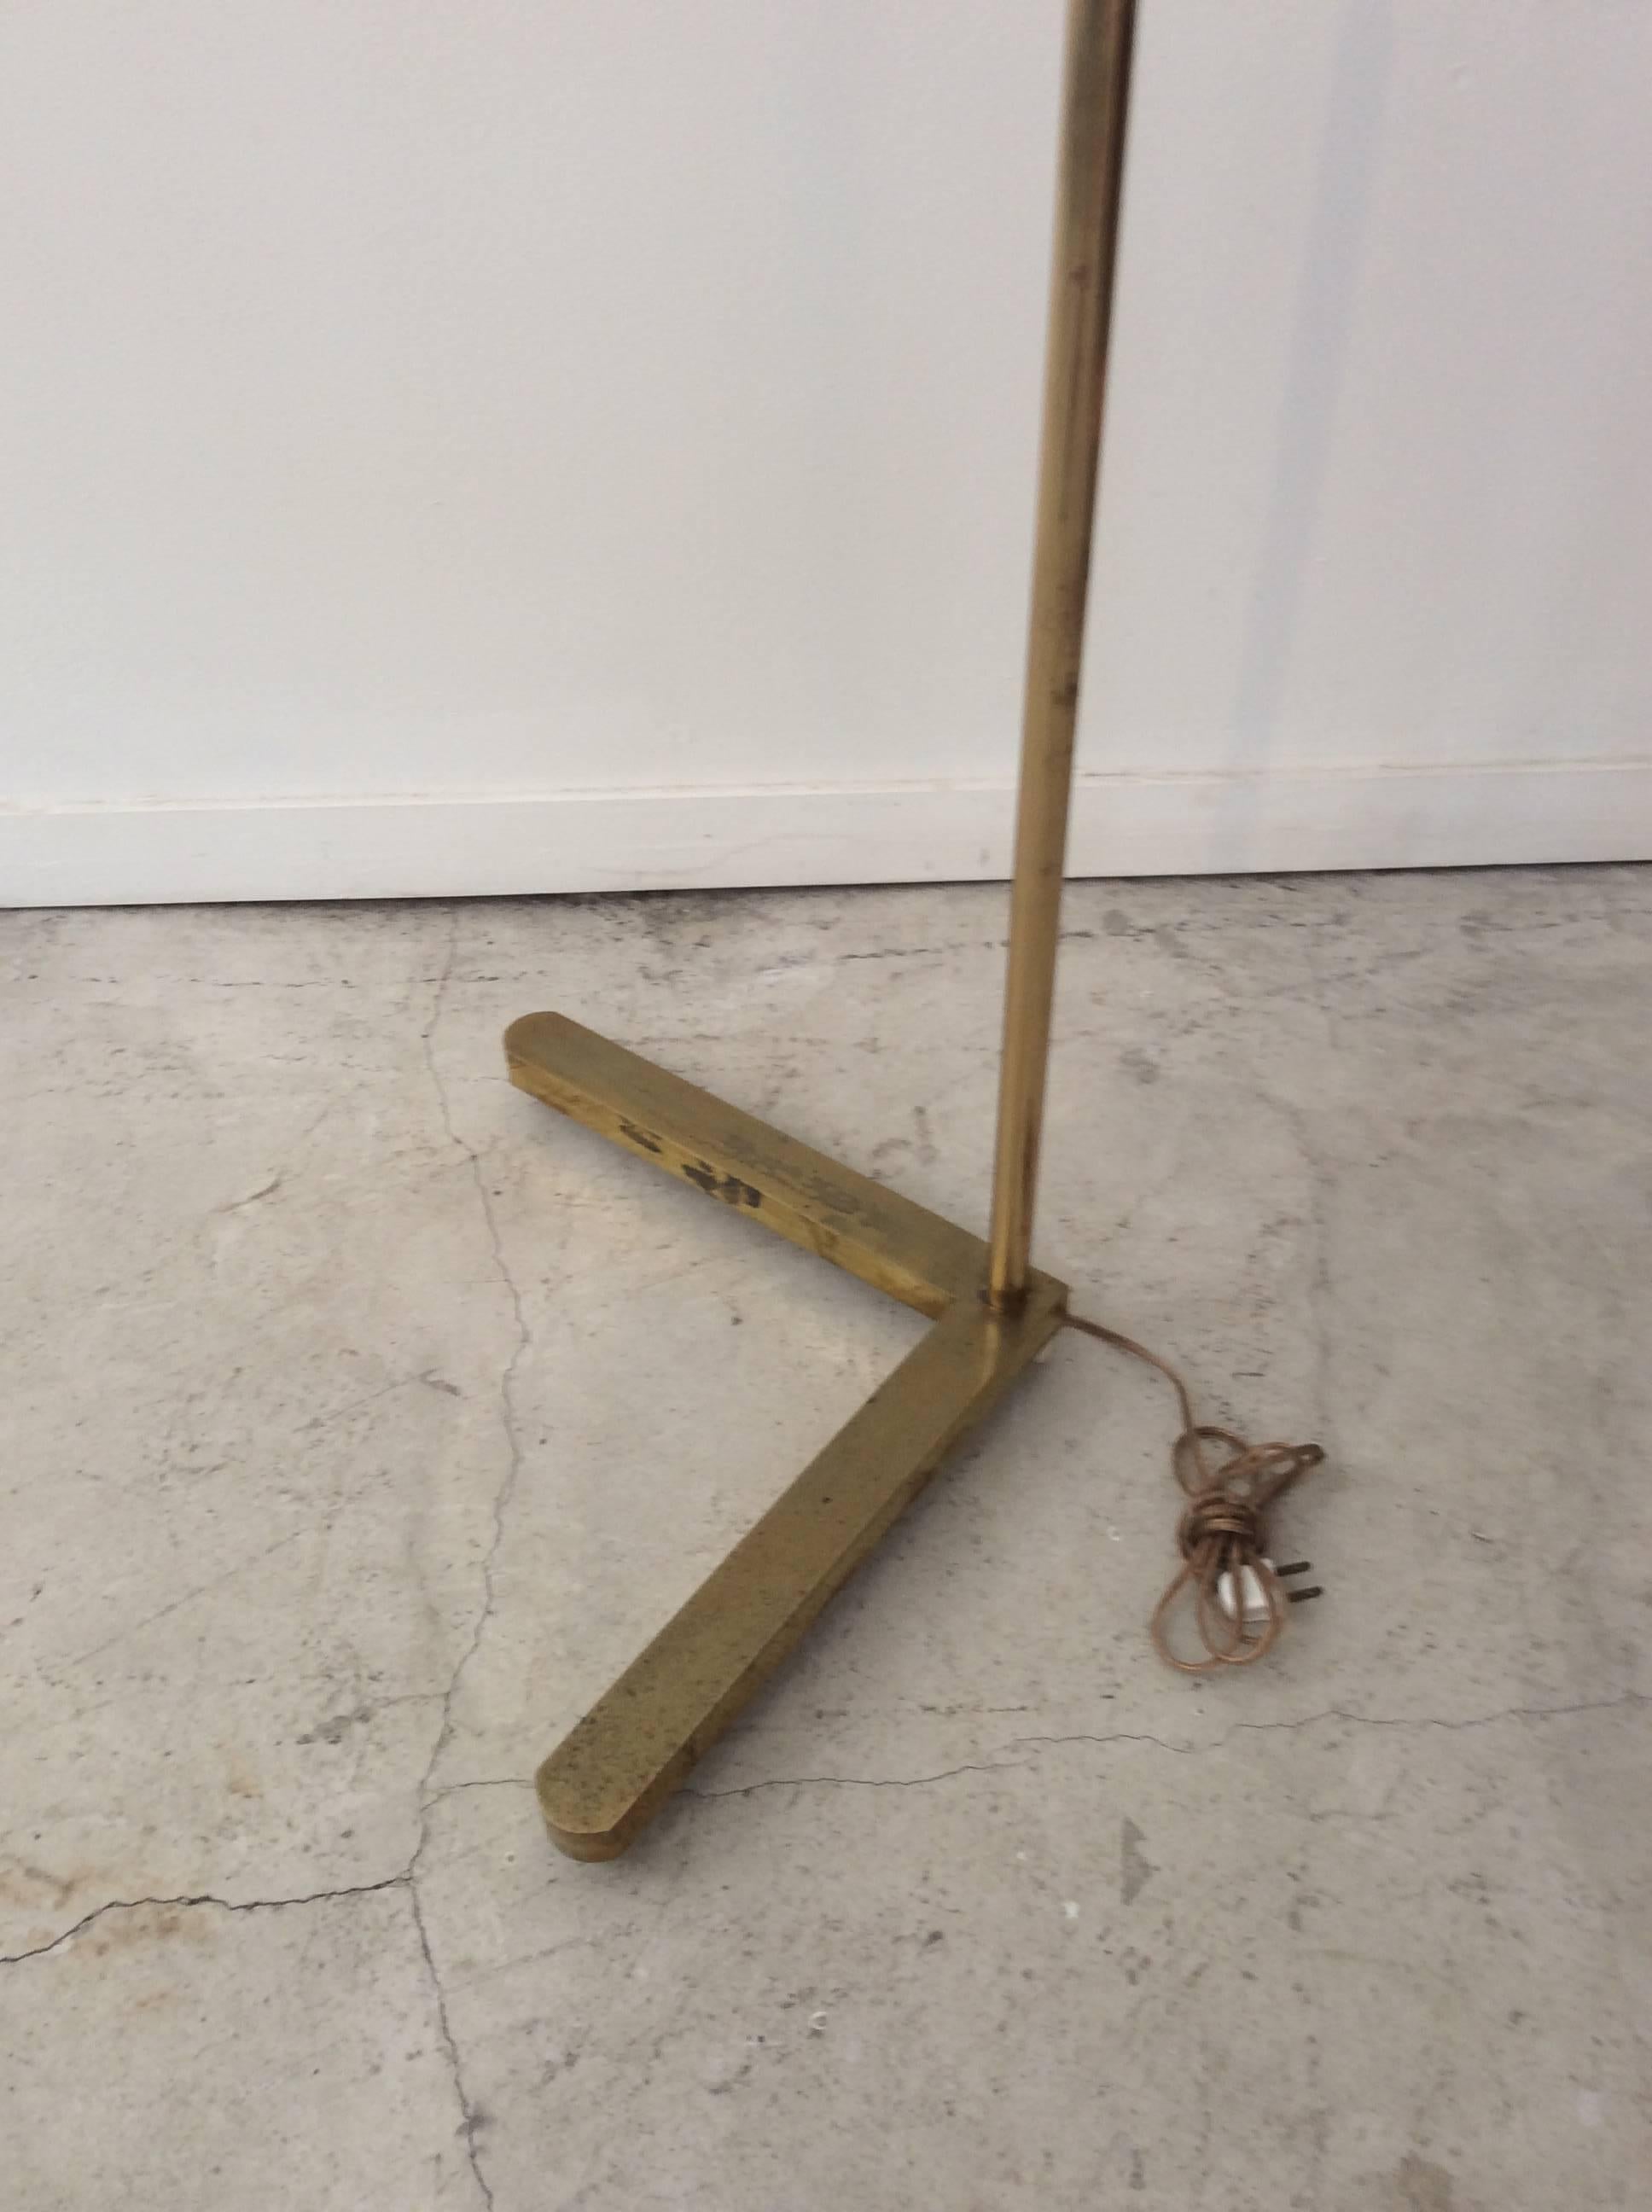 Your looking at a solid brass adjustable floor lamp made by Casella. The base is 